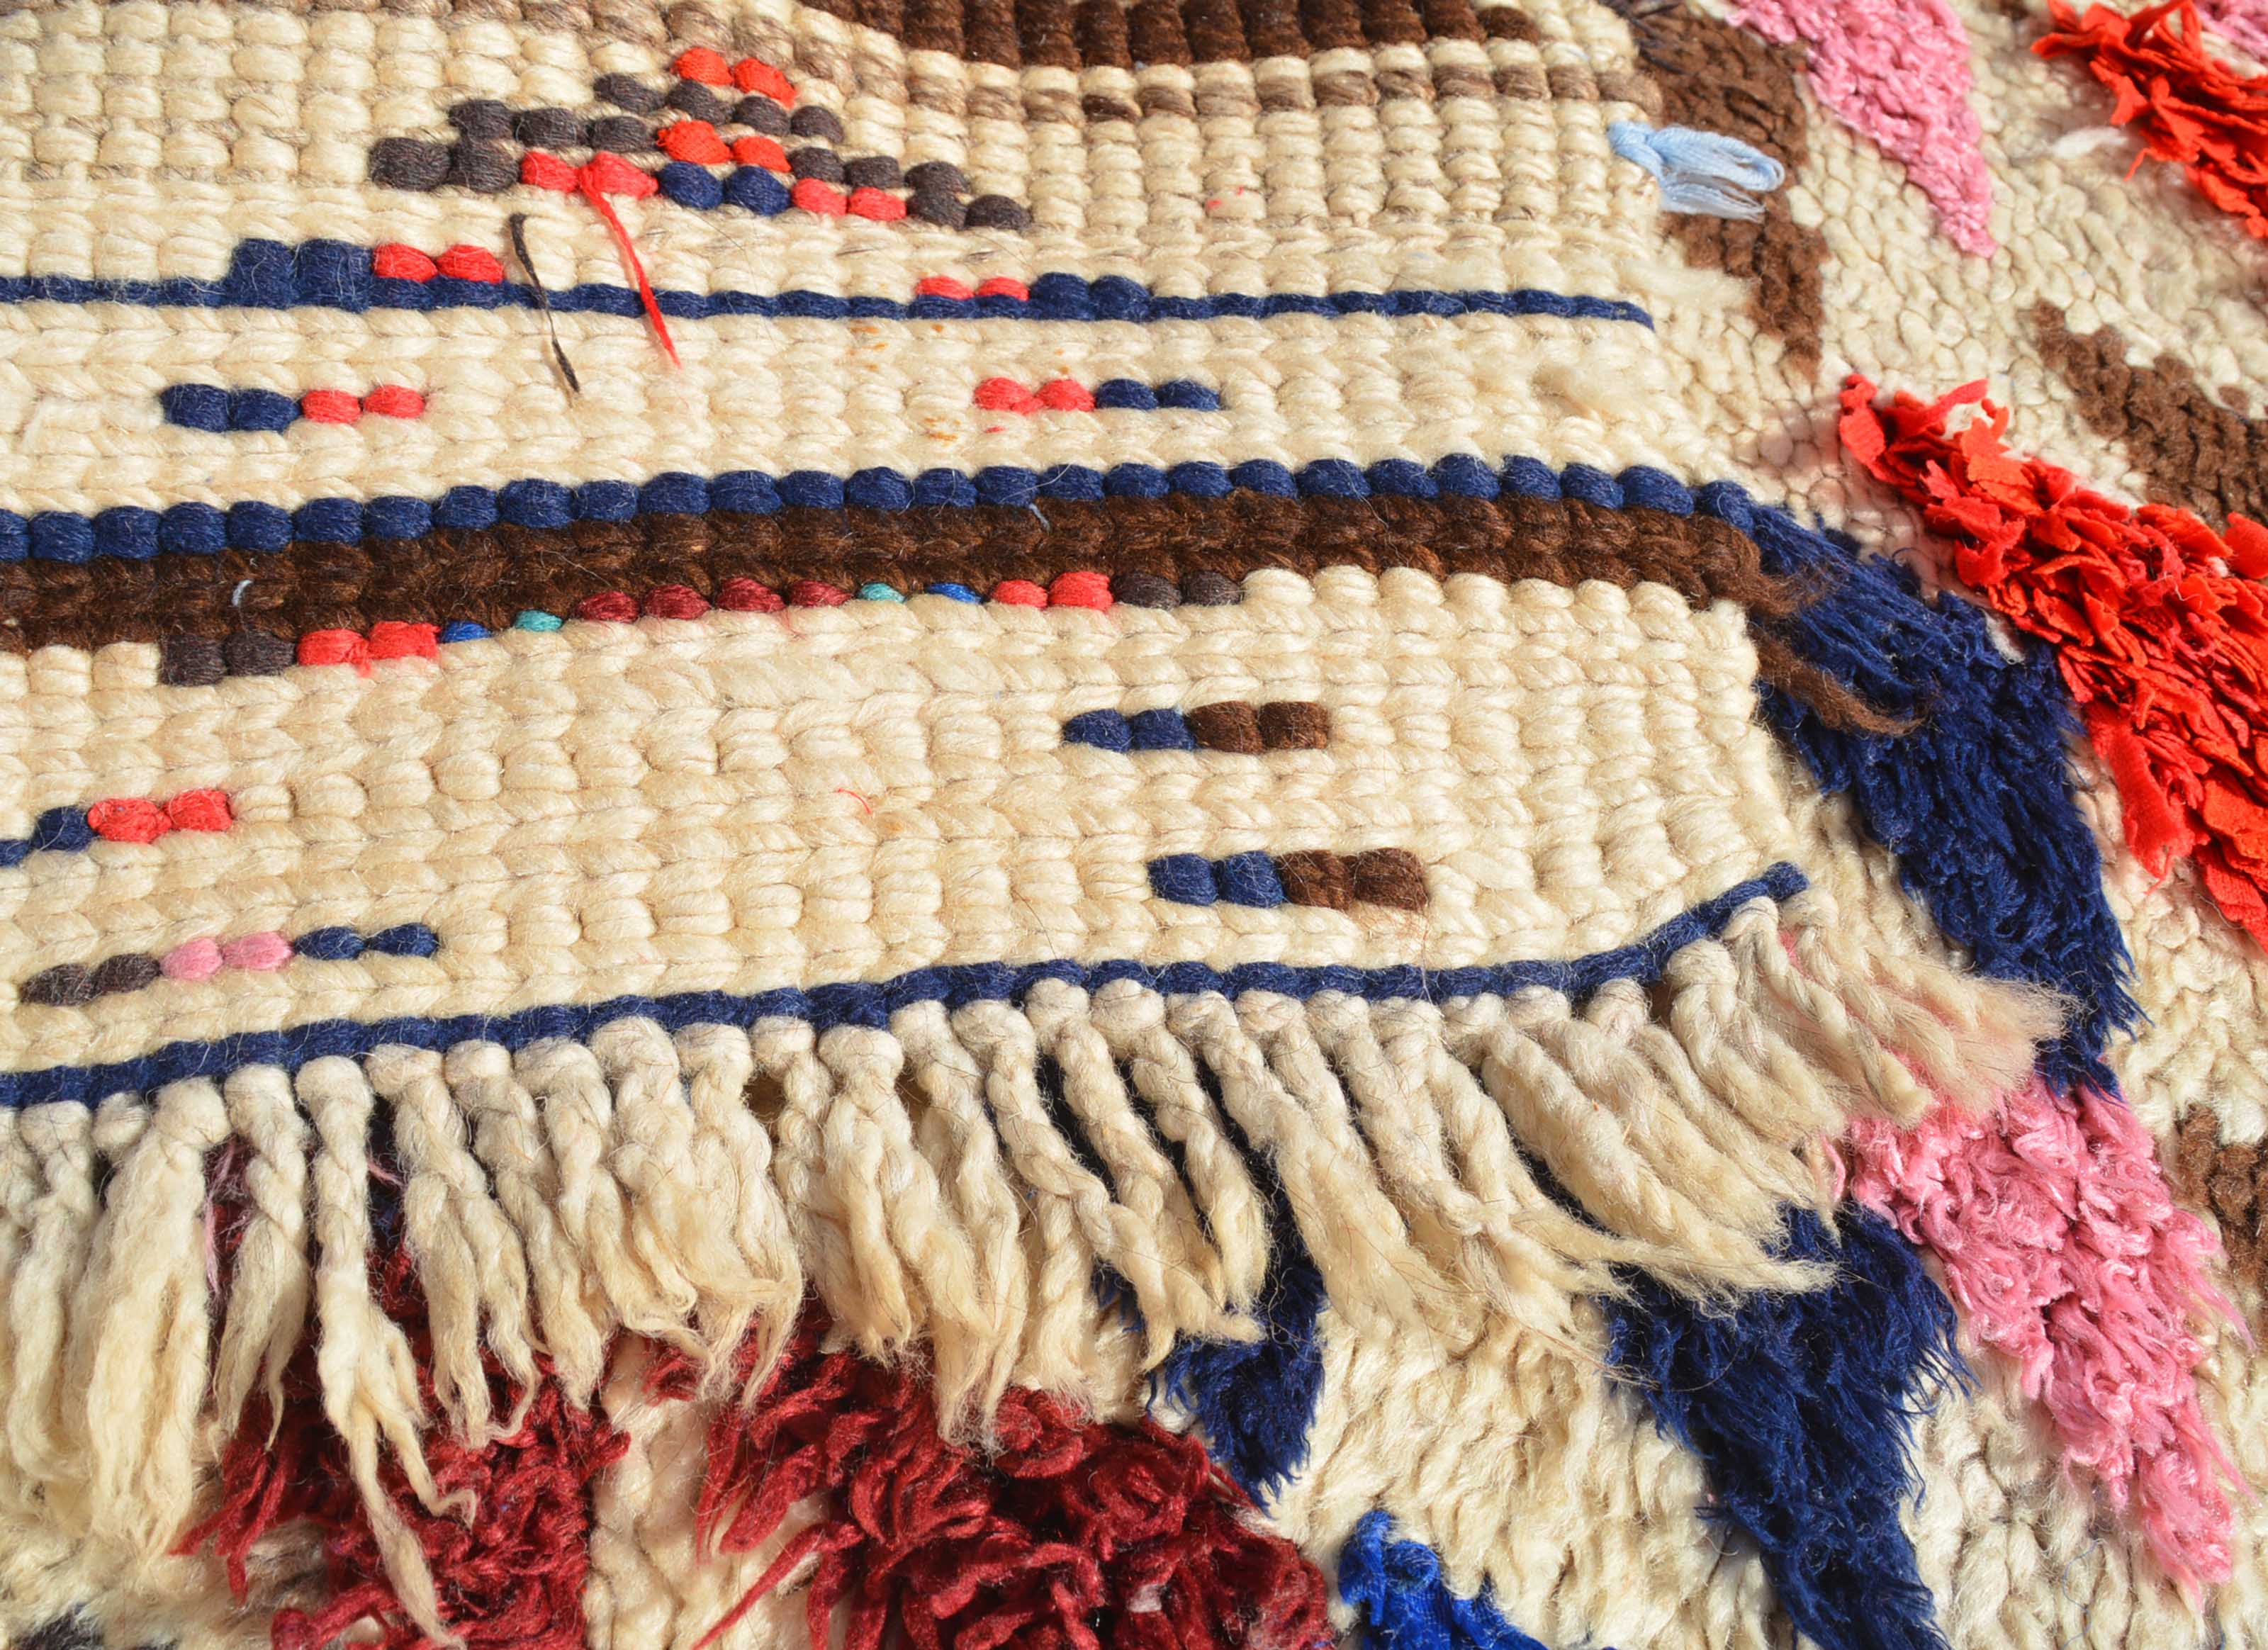 Vintage Moroccan Rug Vintage Art Deco Rugs - Vintage Mexican Rugs - Illuminate Collective illuminate collective 